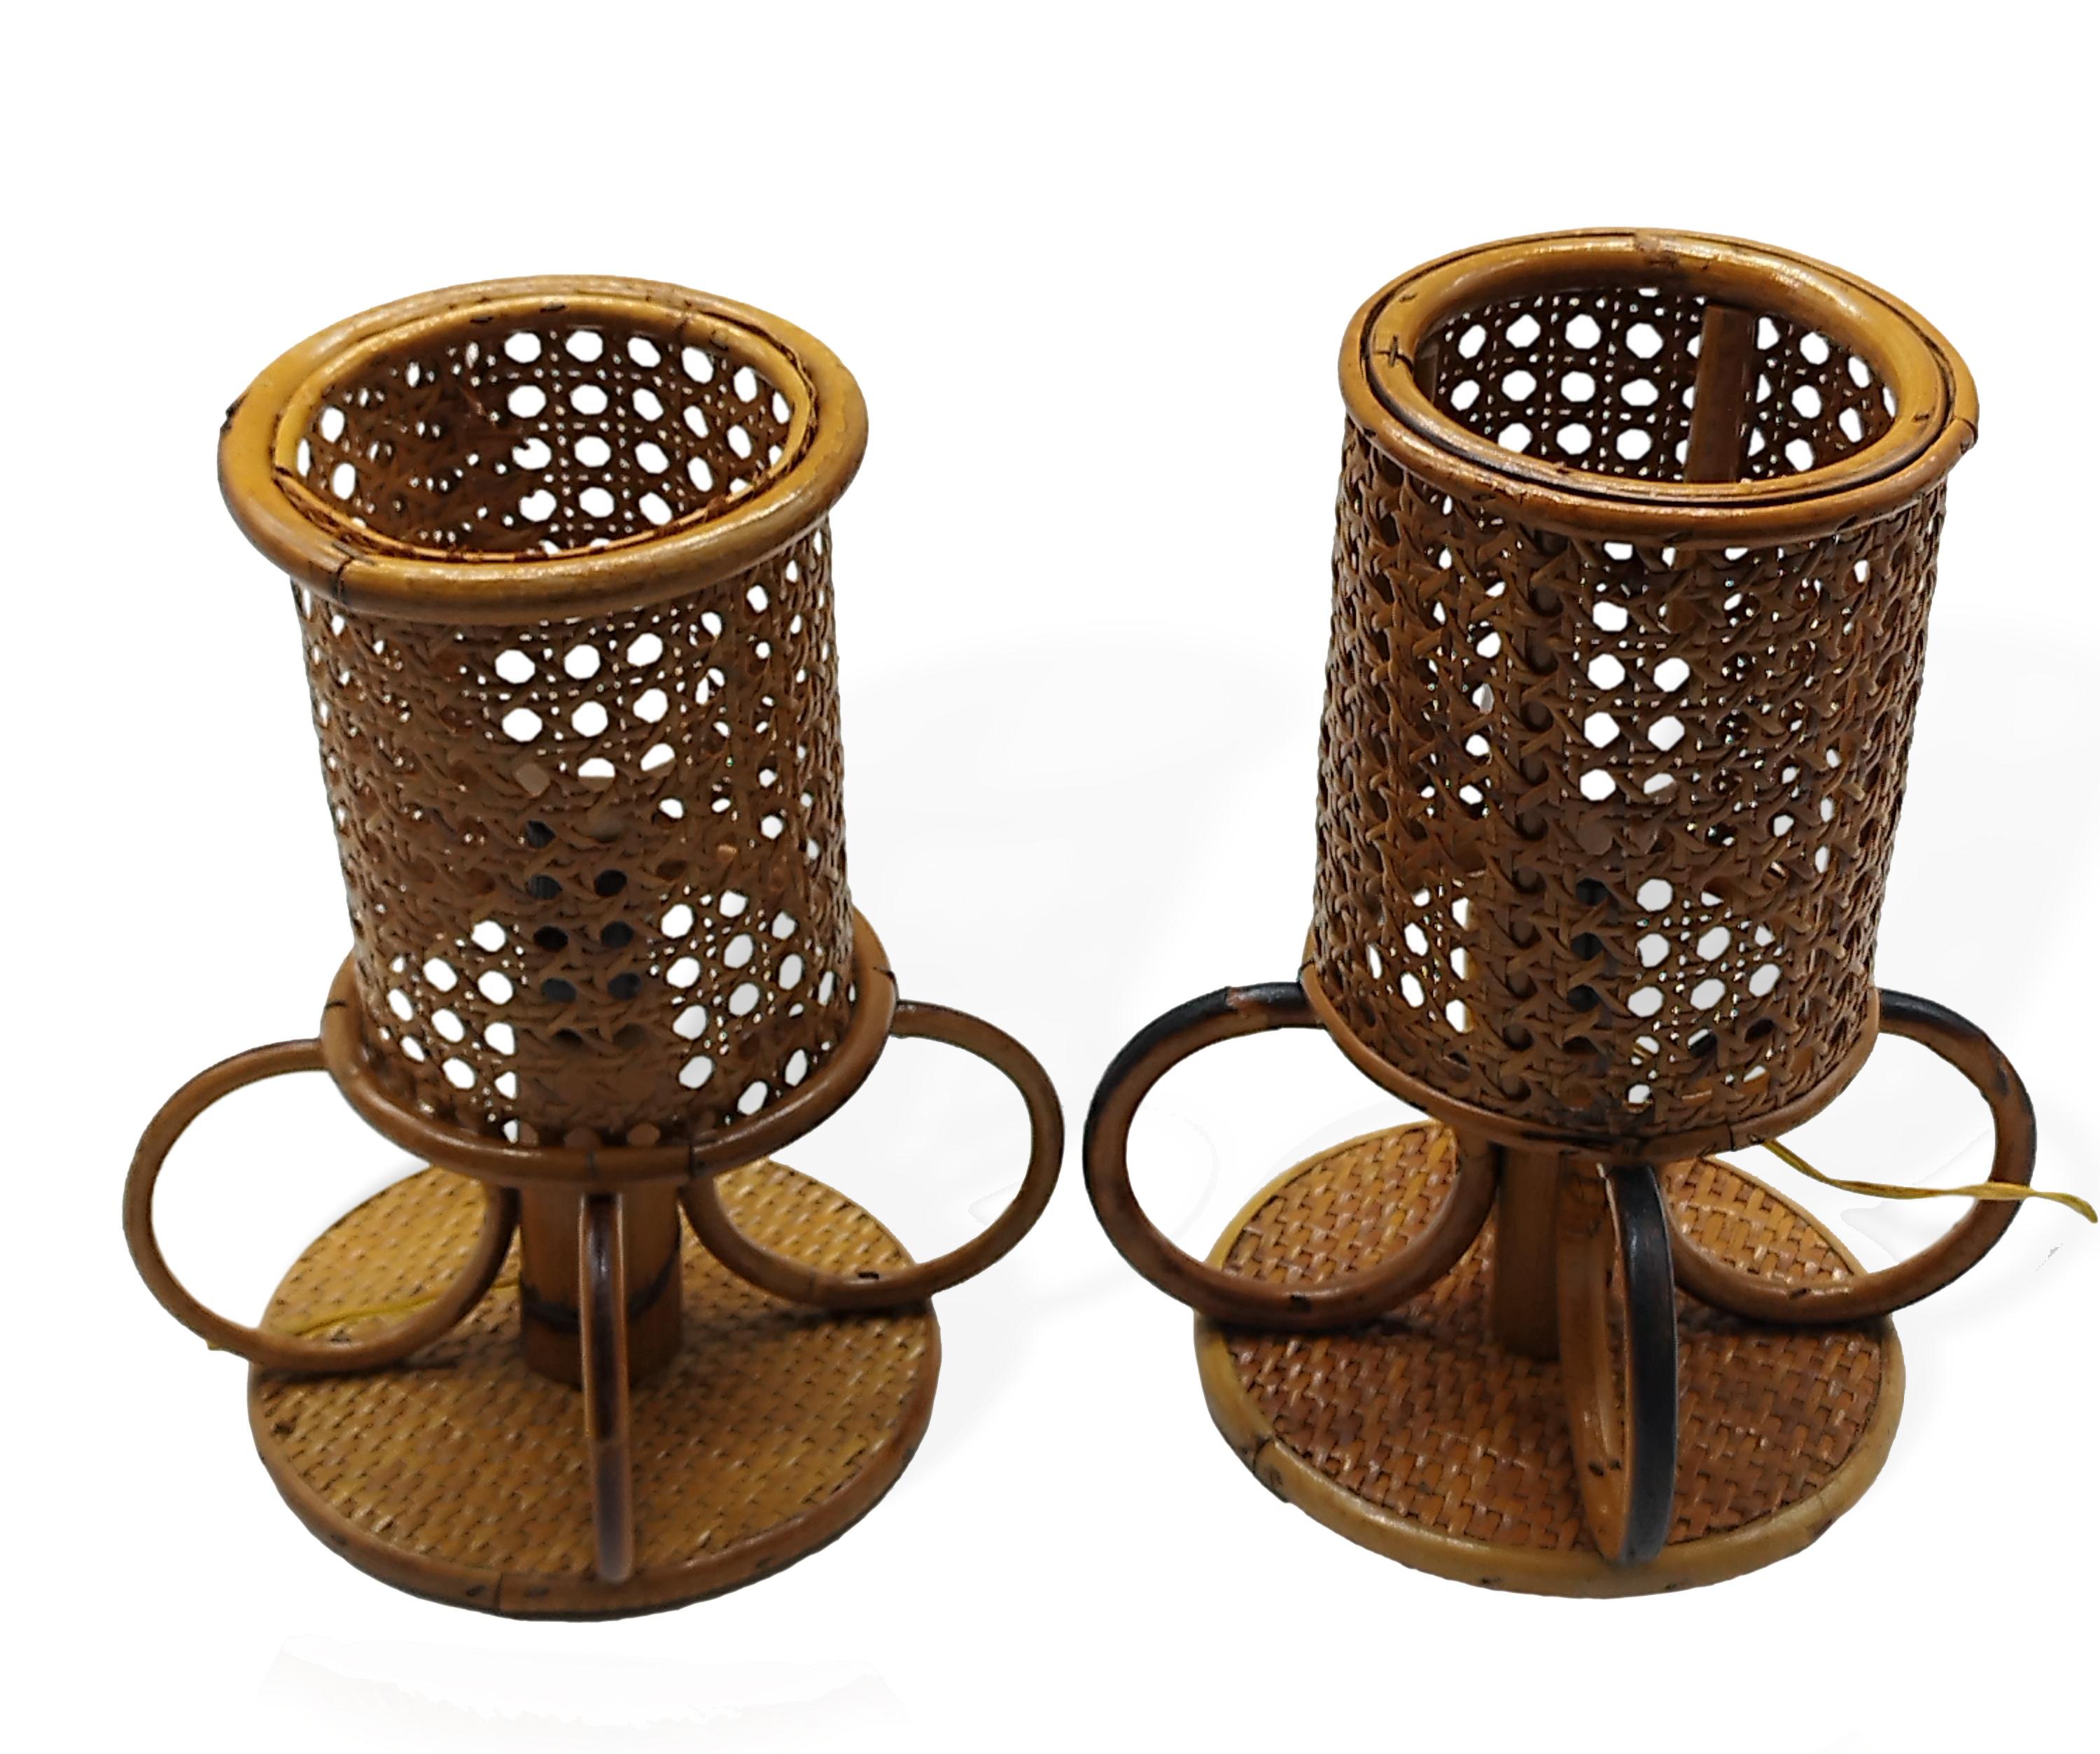 Delightful pair of table or bedside lamps made of bamboo and rattan. The shade is made of Viennese mesh, while the base features a rattan and bamboo structure.